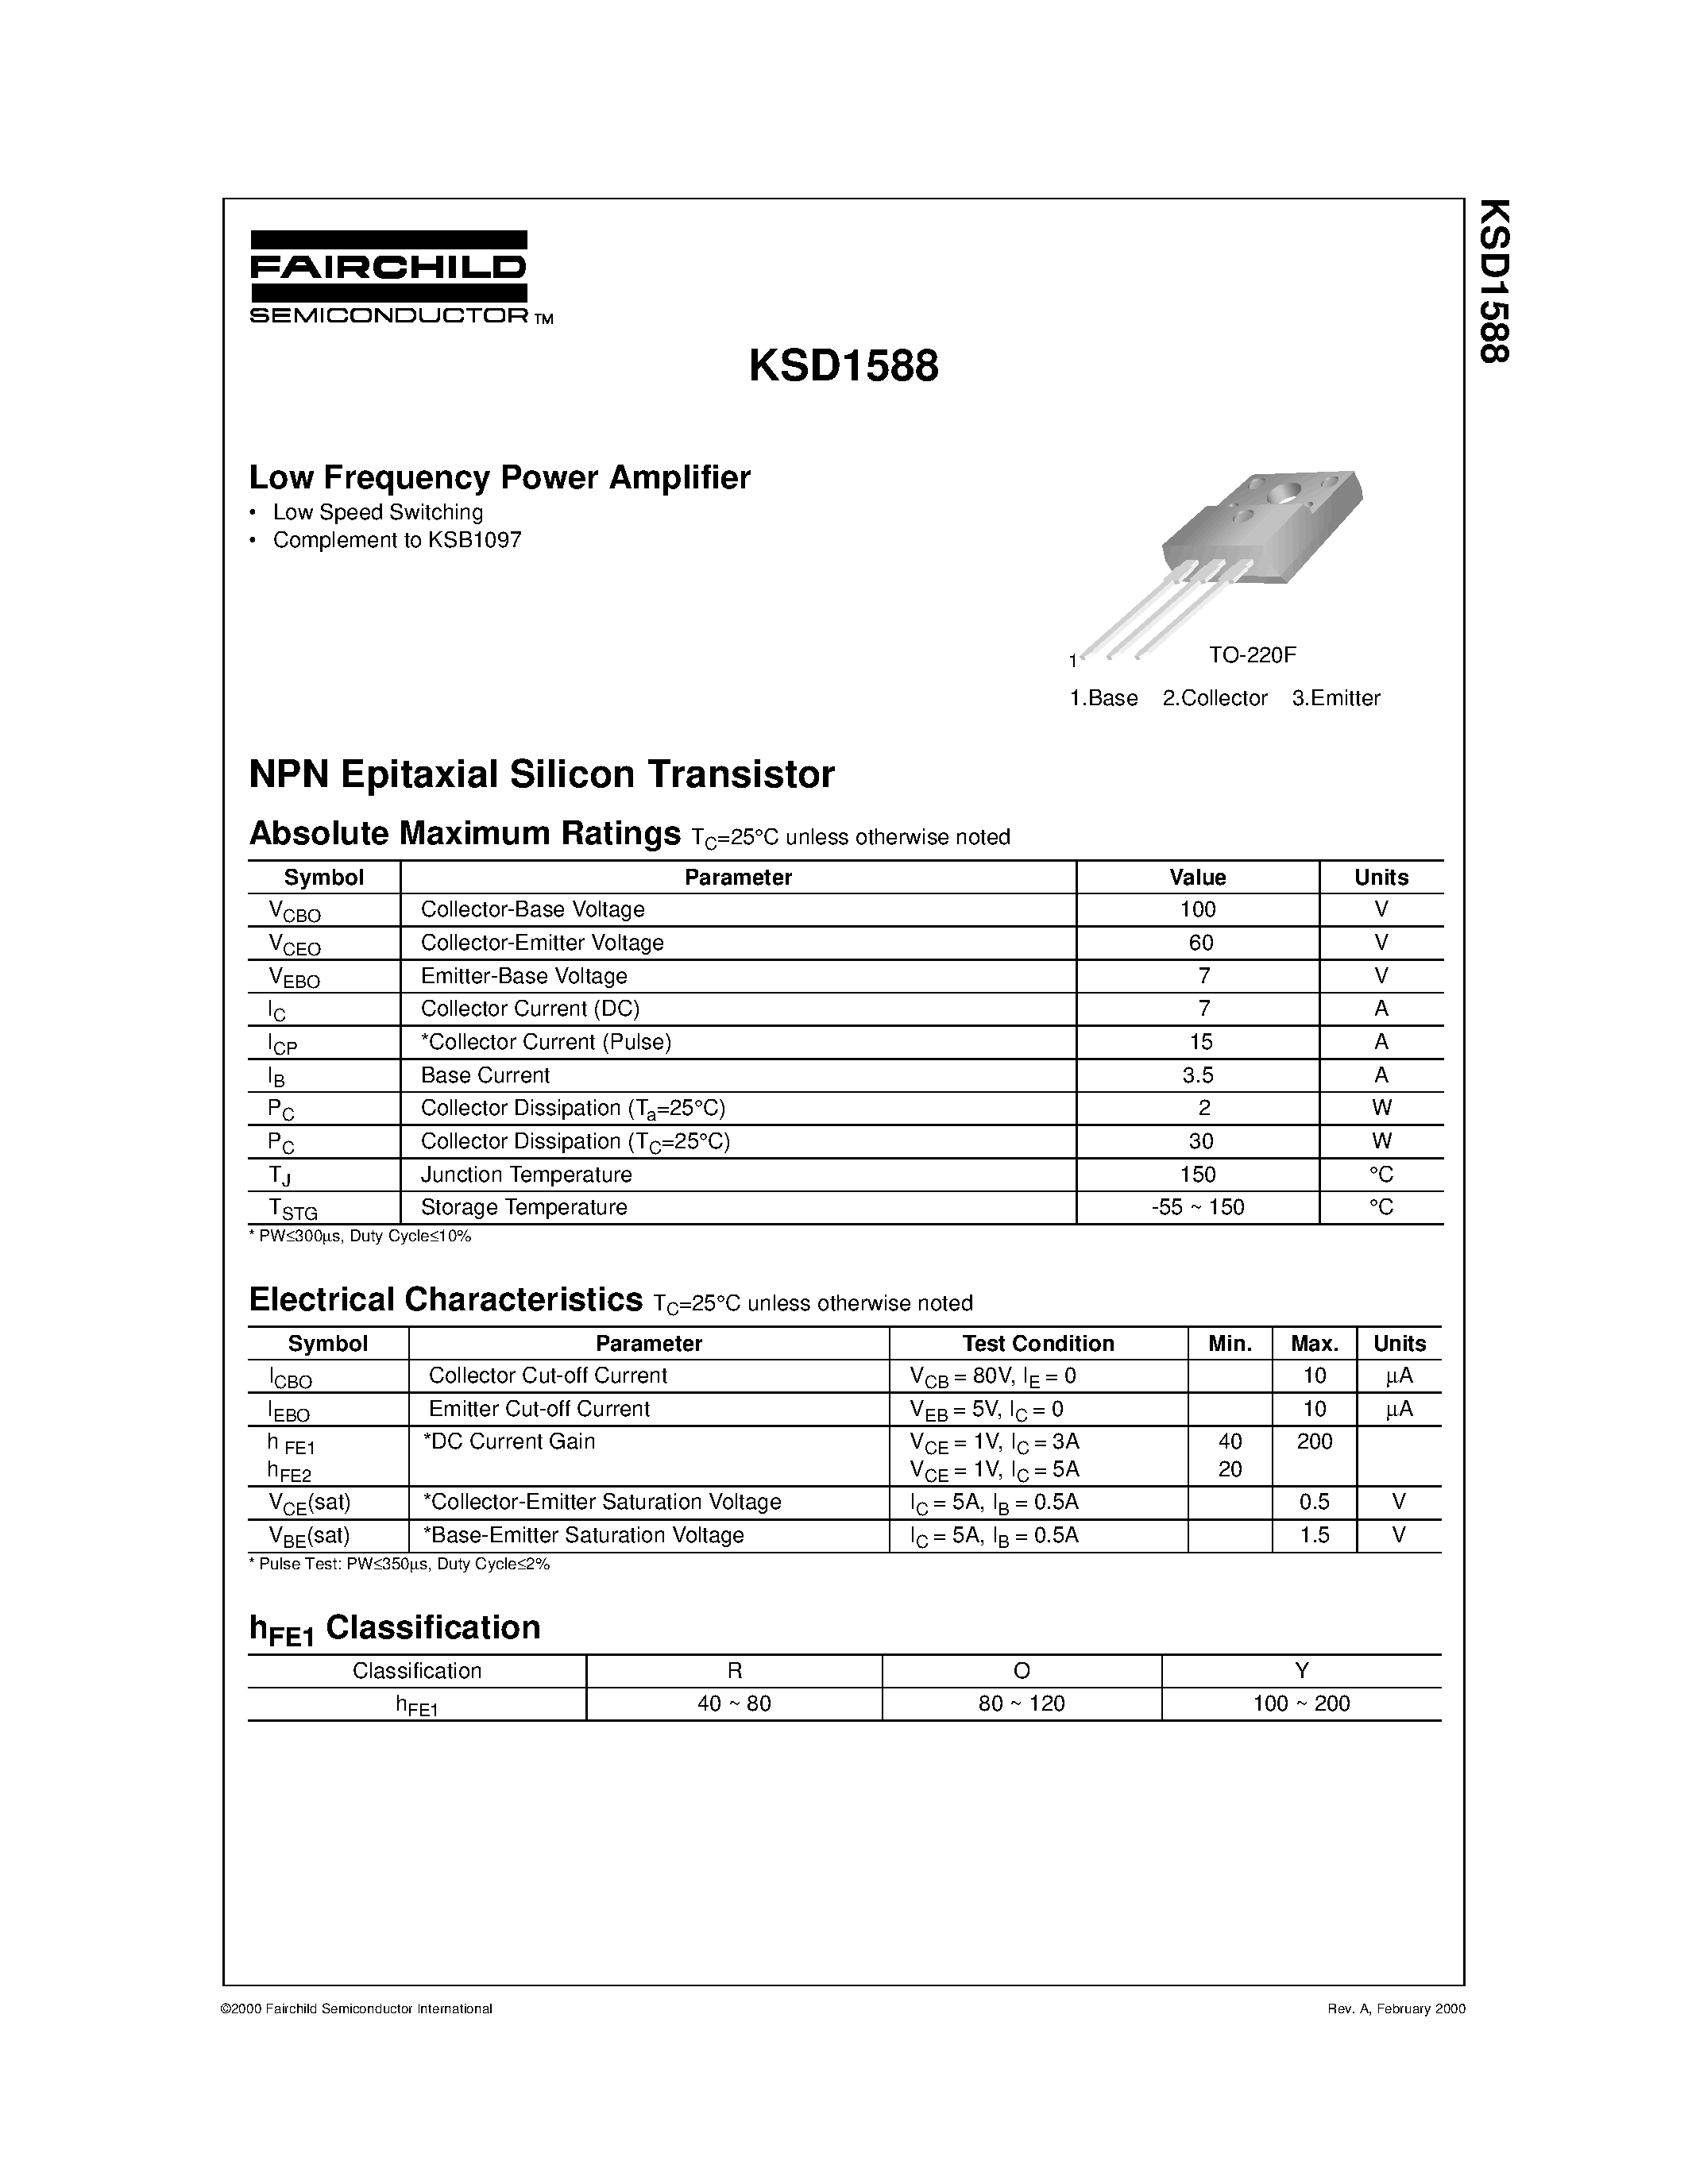 Datasheet KSD1588 - Low Frequency Power Amplifier page 1